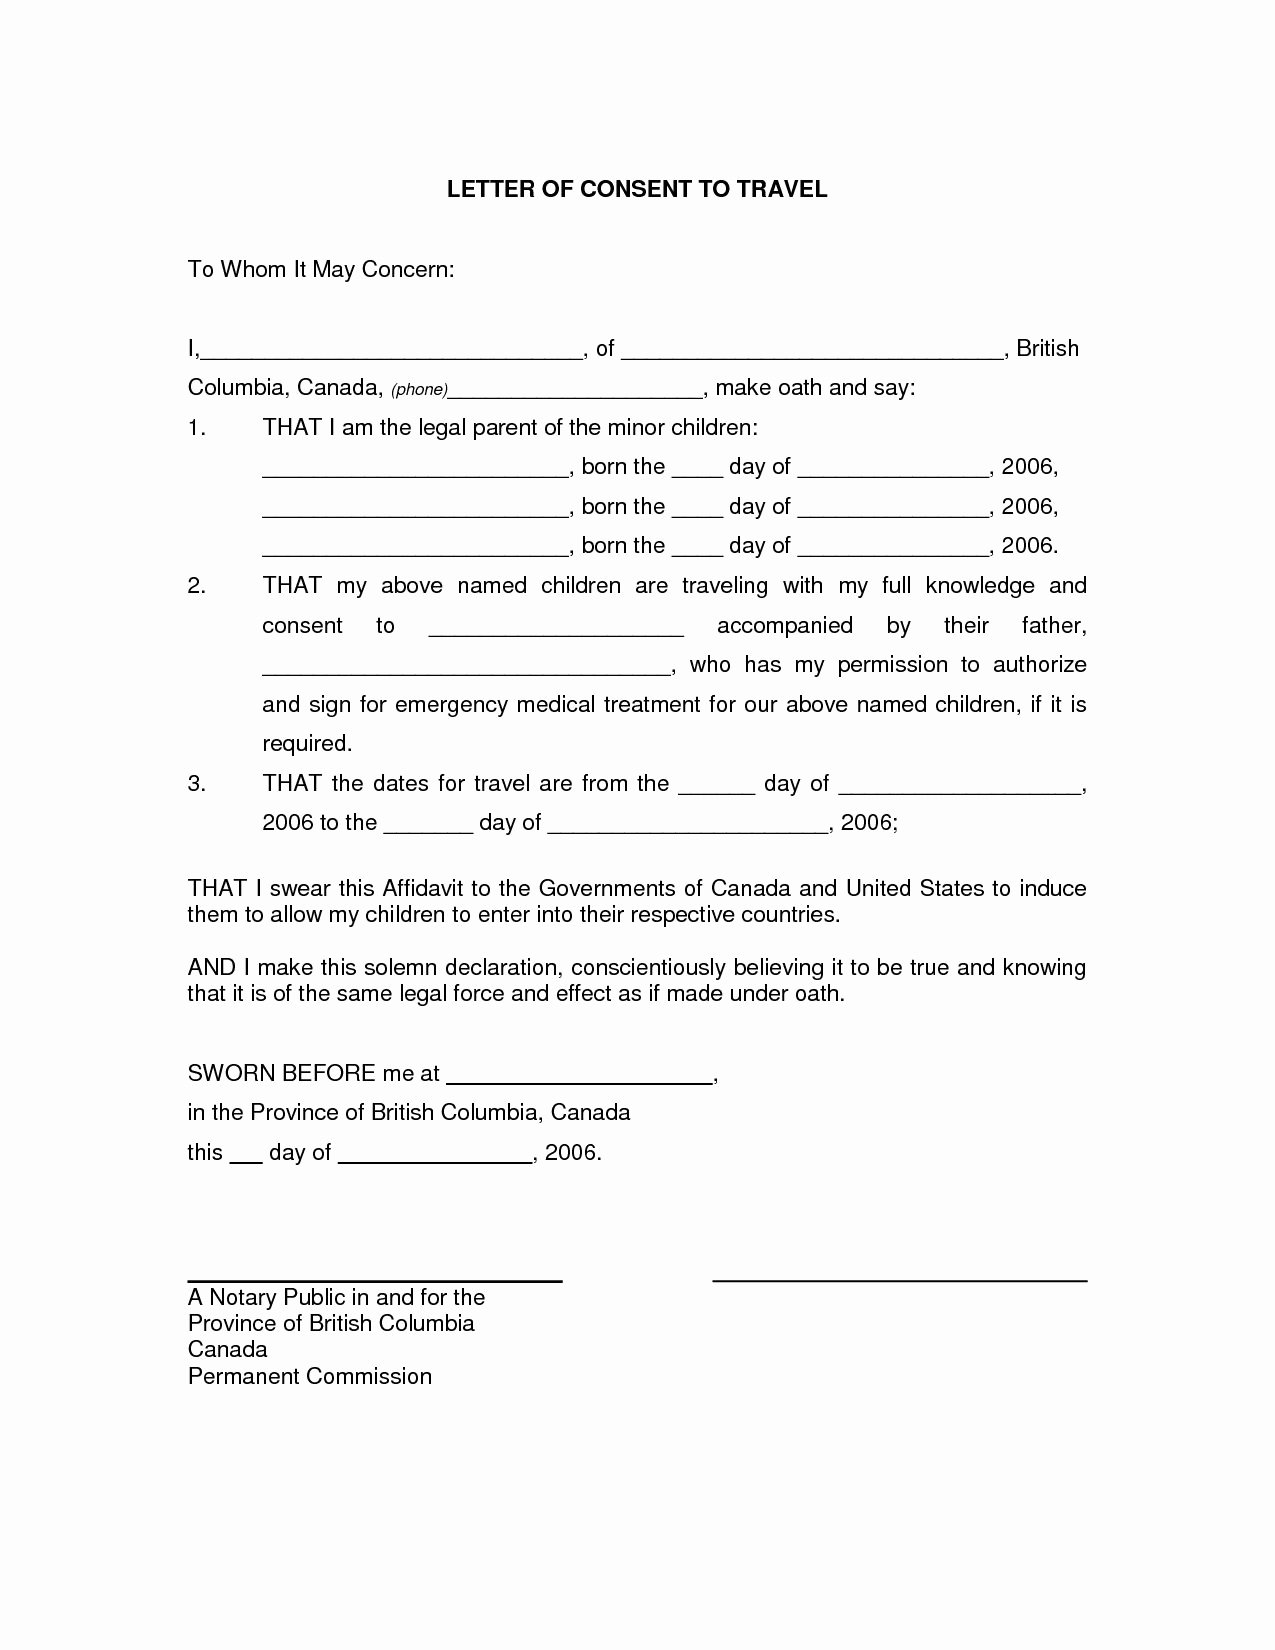 Letter Consent to Travel with E Parent